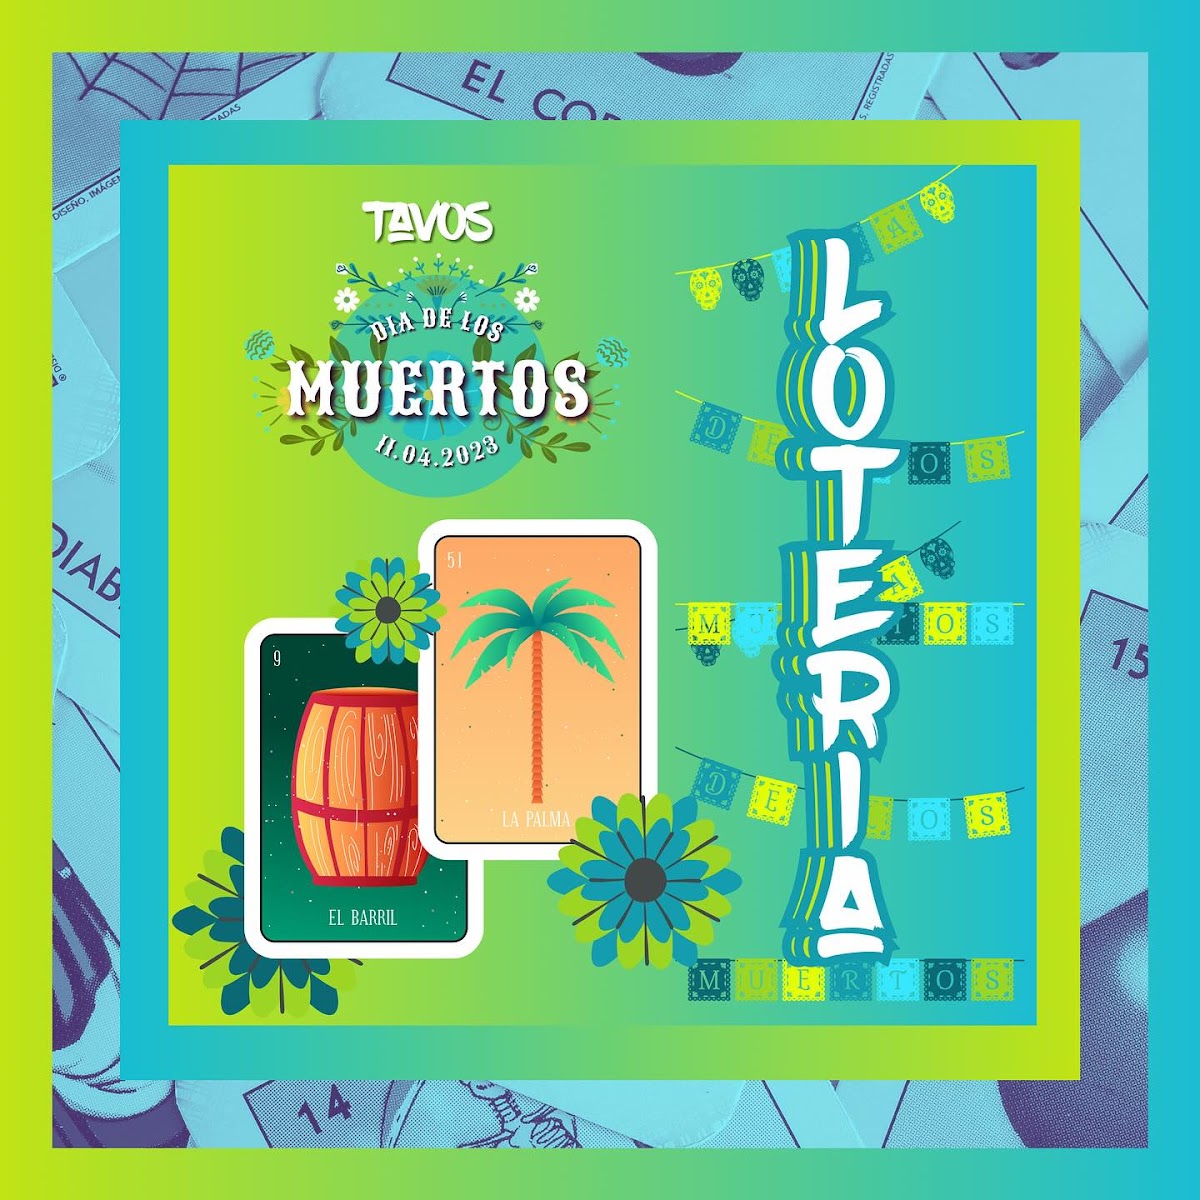 🎉 Get ready for a Dia de Los Muertos bash at Tavos on November 4th! 🌟 We're spicing things up with Loteria – the Mexican bingo game that's all about fun.